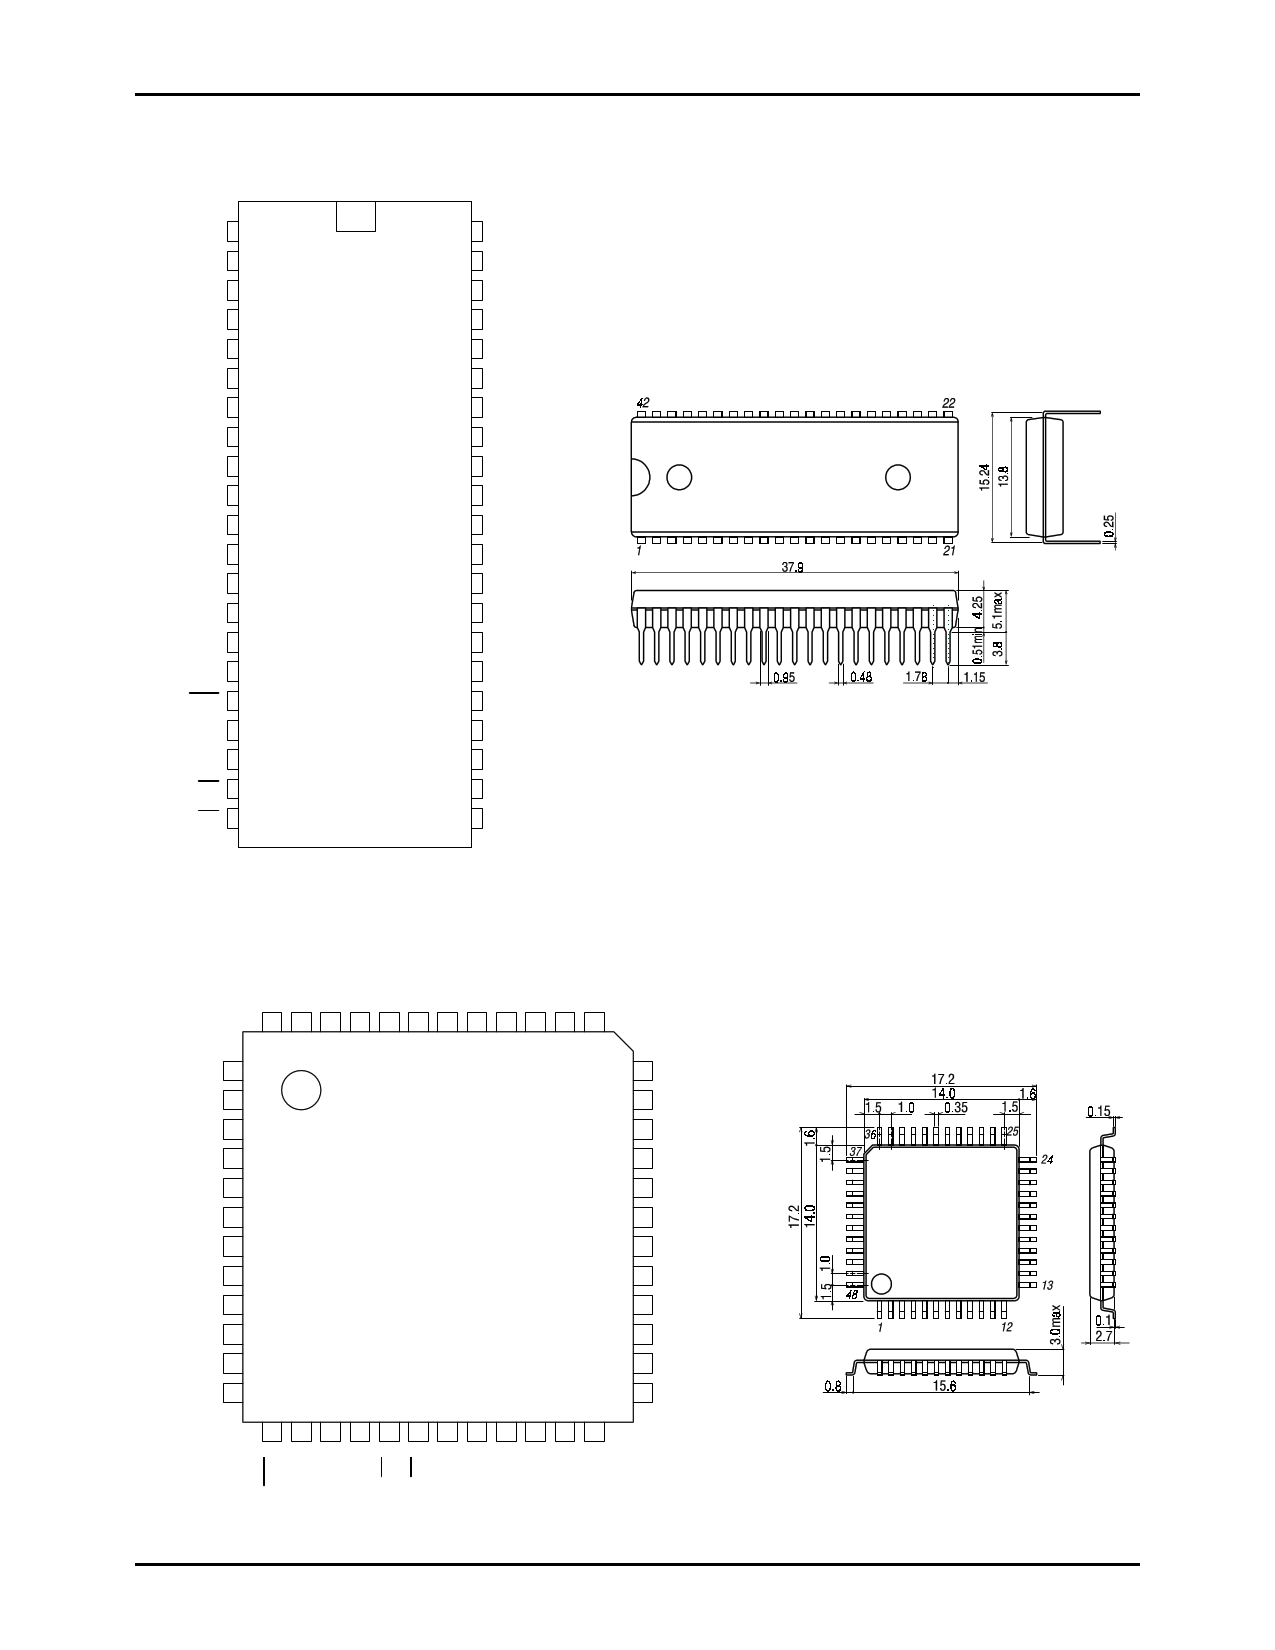 LC863324A Datasheet, Funktion